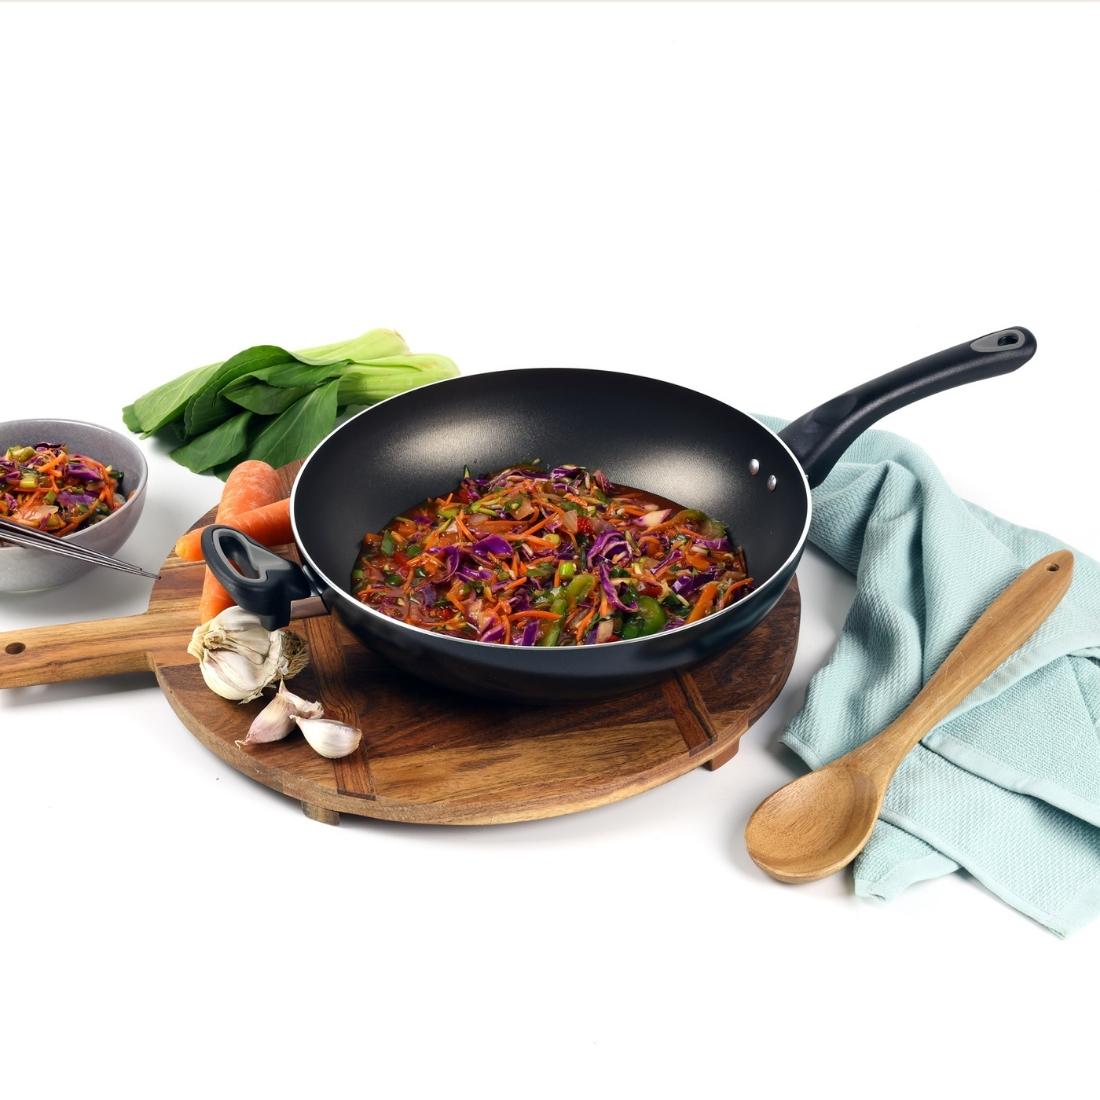 RACO Complete Nonstick Induction Open Stirfry 30cm